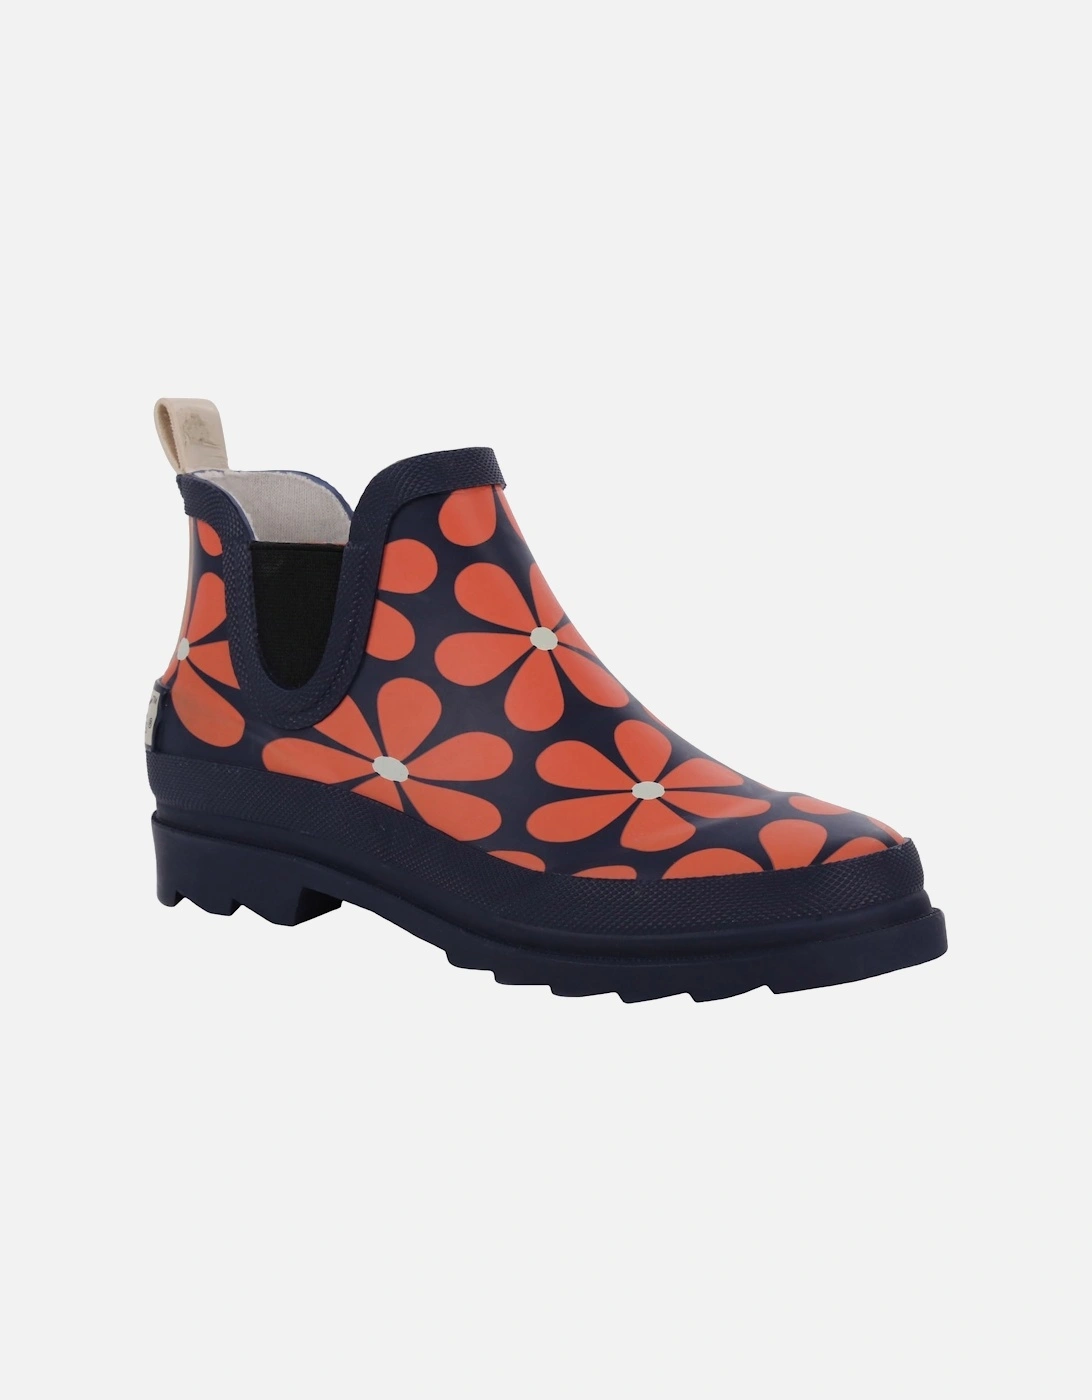 Womens Orla Kiely Ankle Wellies, 38 of 37